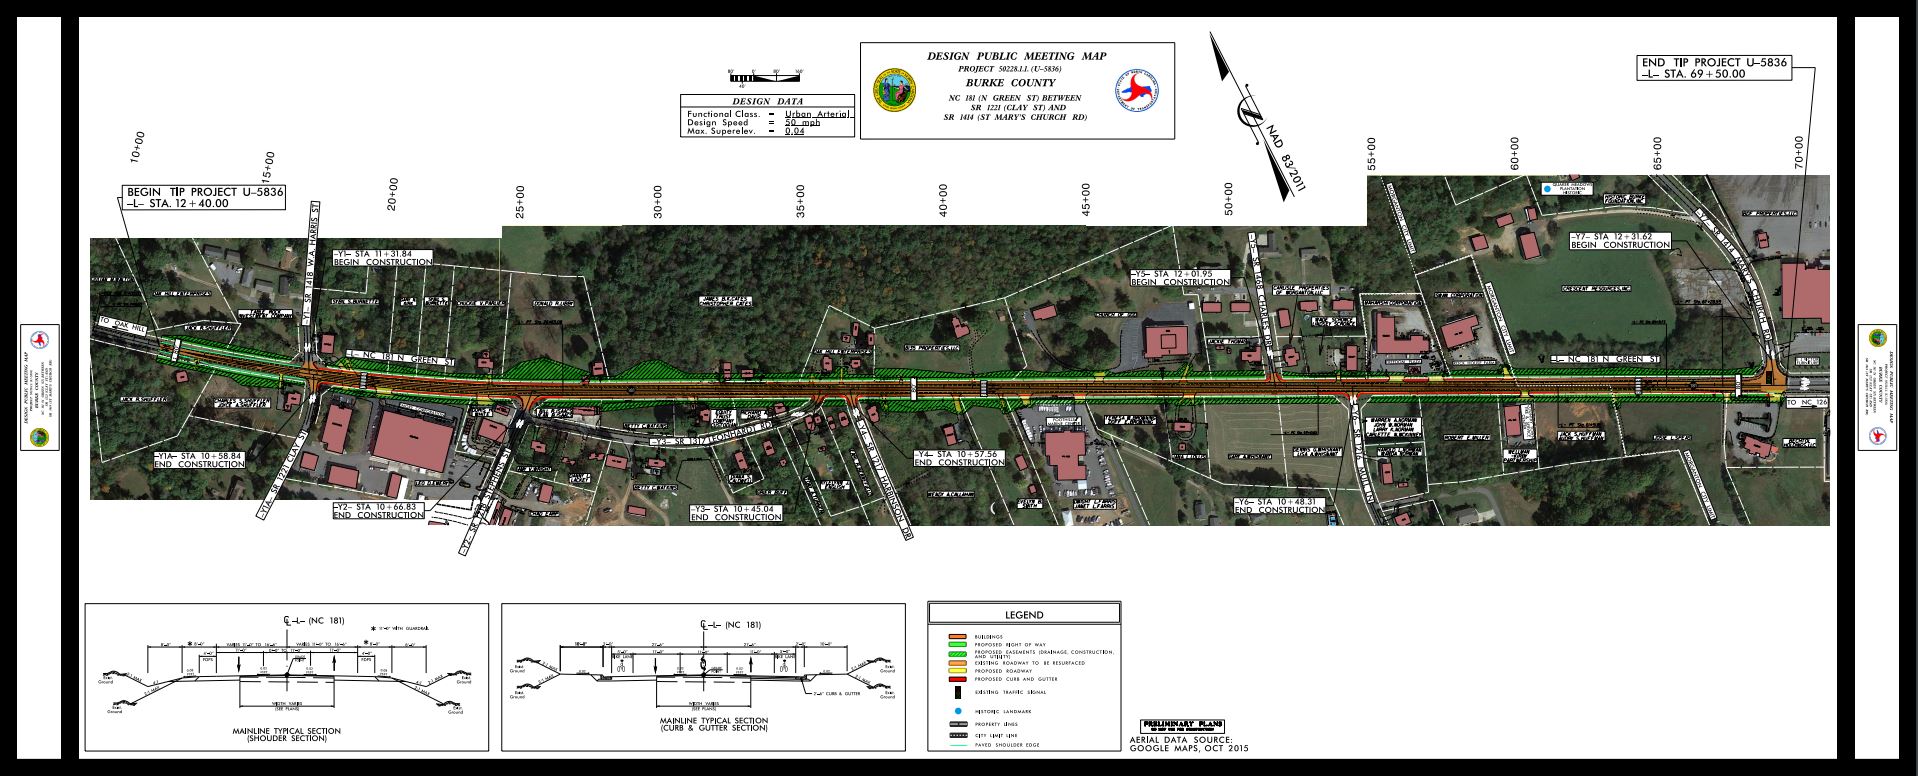 NC 181 Road Widening Eminent Domain Project Map